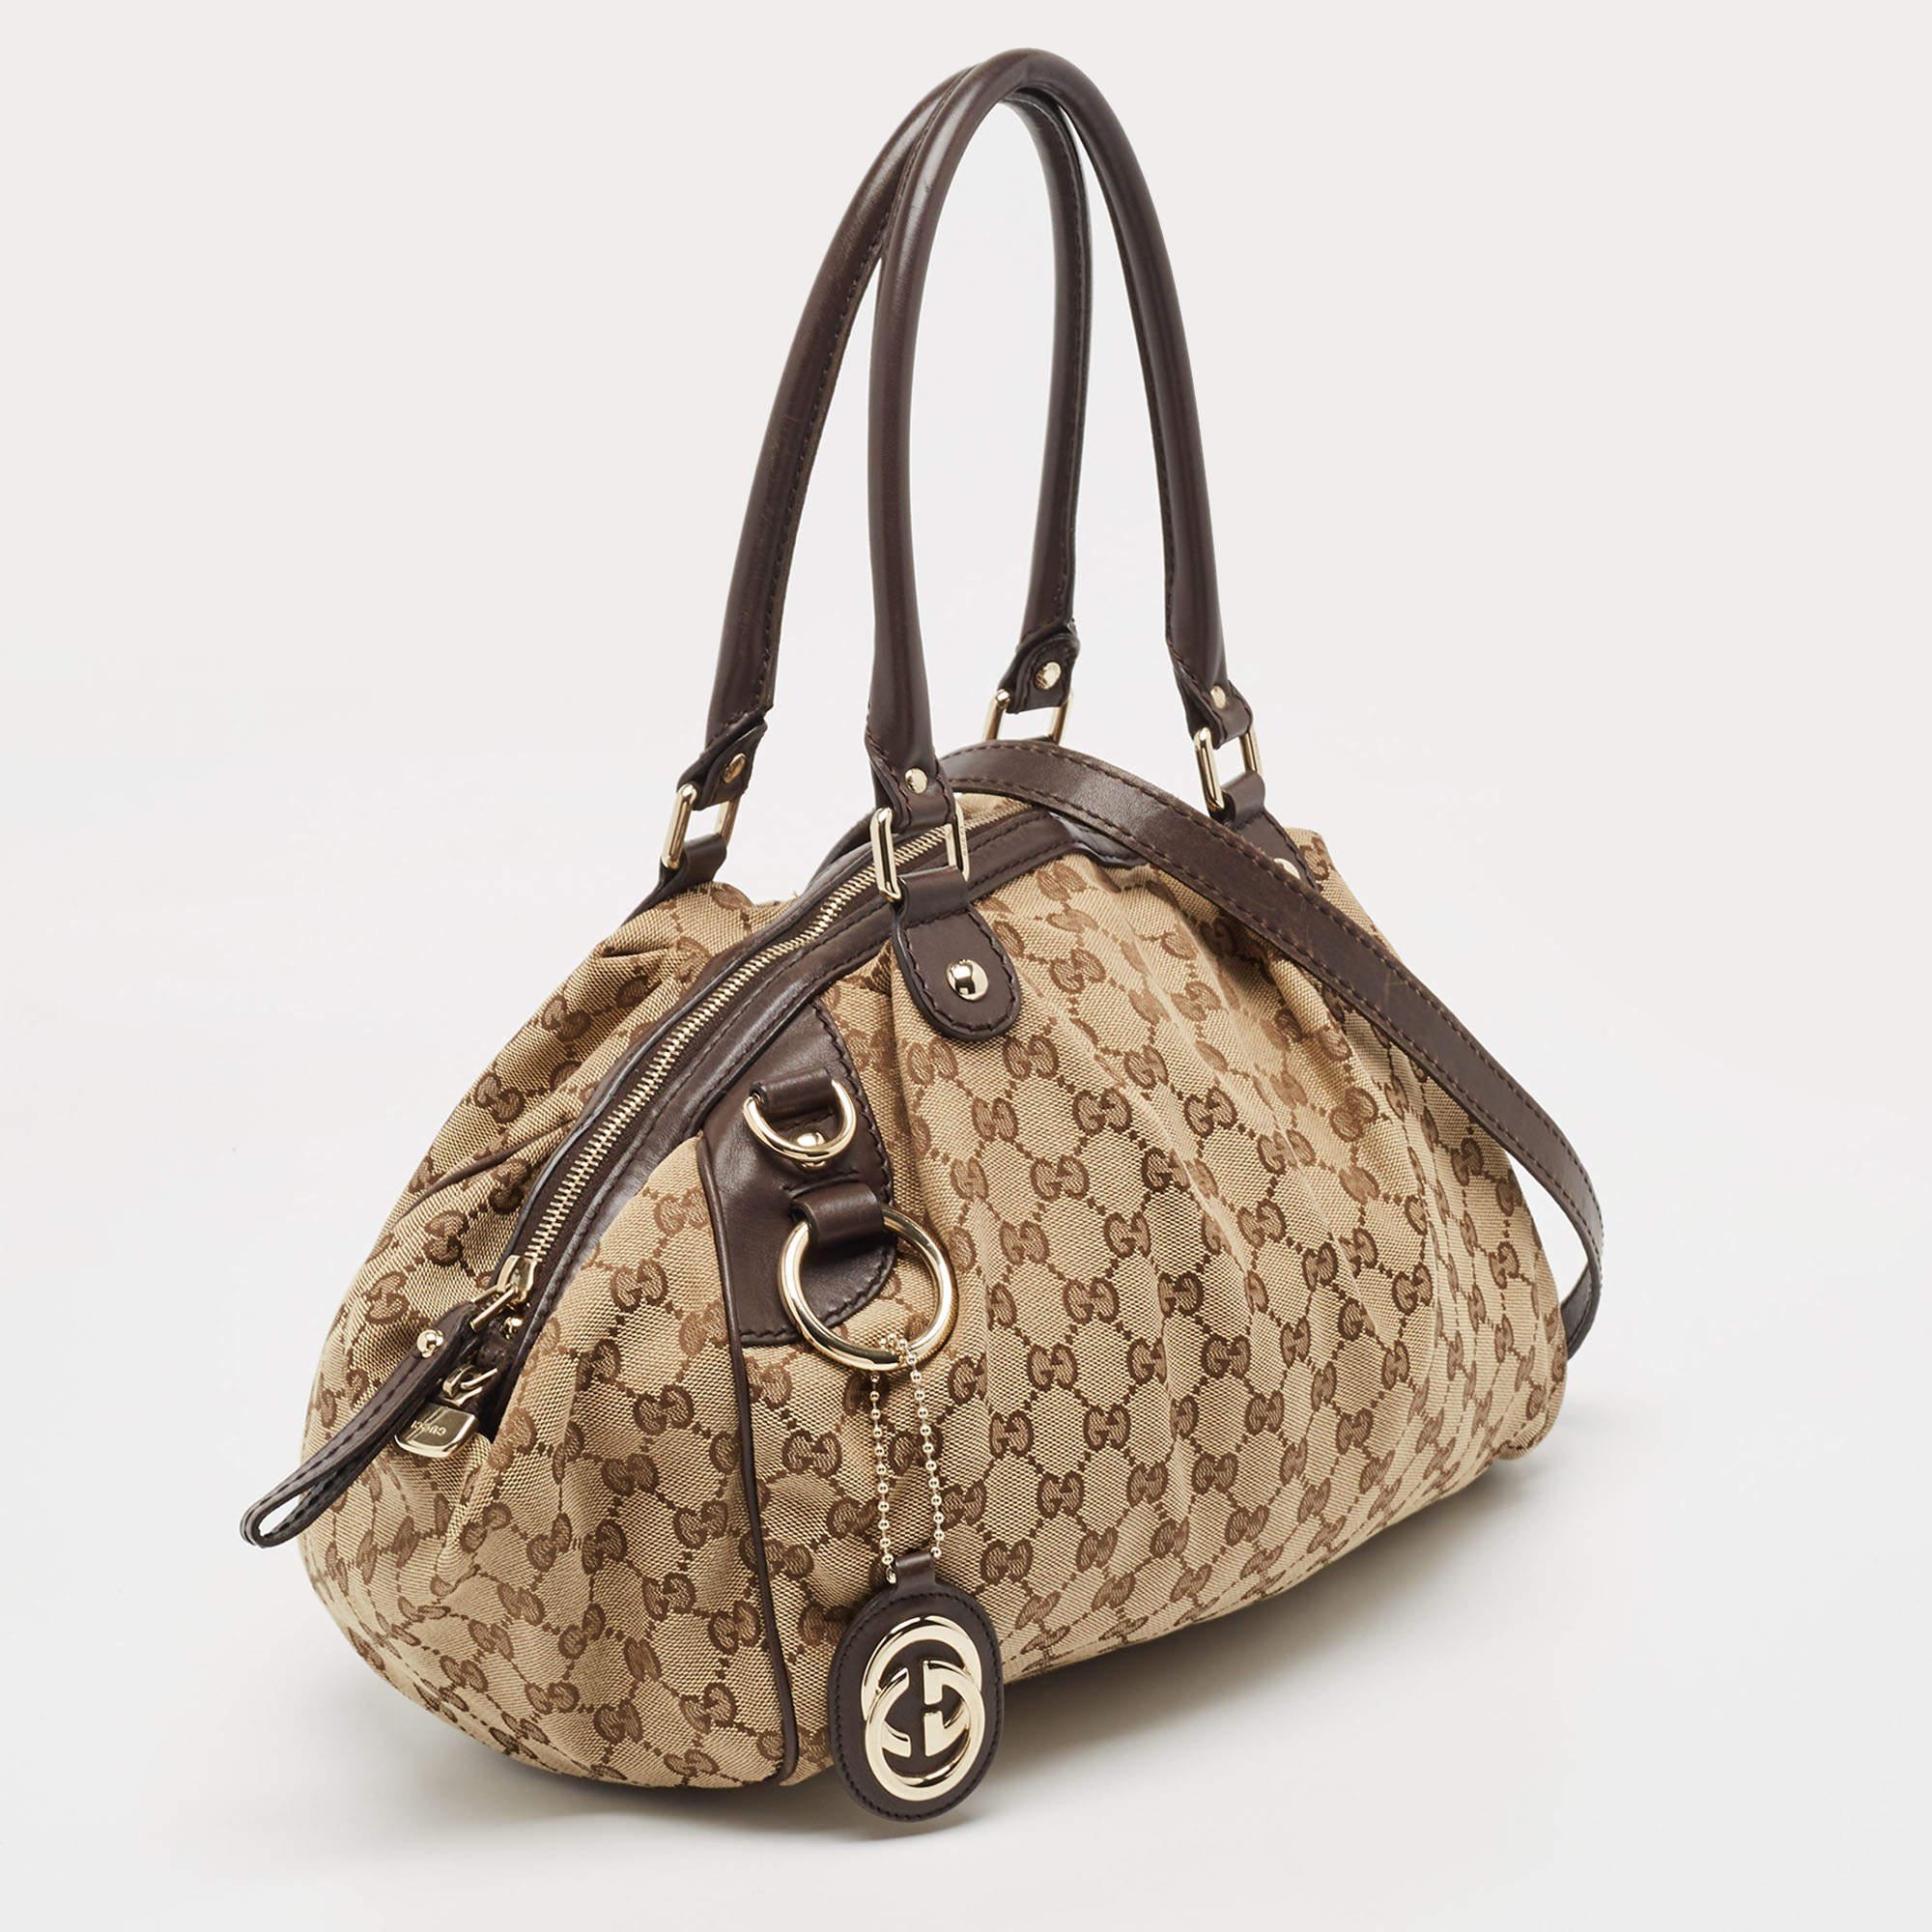 This authentic Gucci Sukey Boston bag is an example of the brand's fine designs that are skillfully crafted to project a classic charm. It is a functional creation with an elevating appeal.

